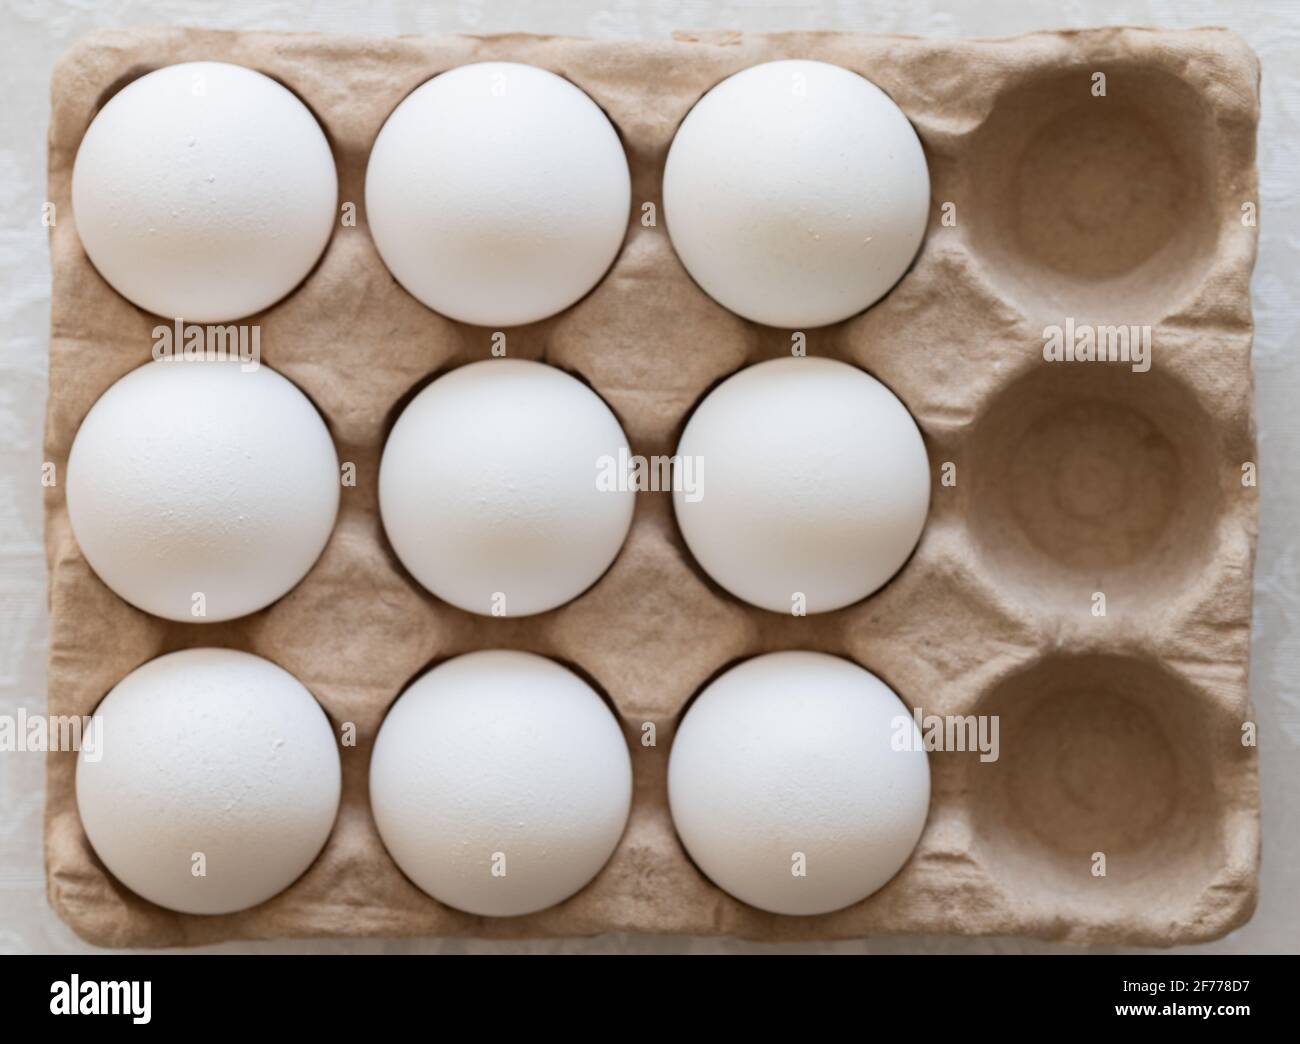 Carton of Eggs with Three Missing Stock Photo